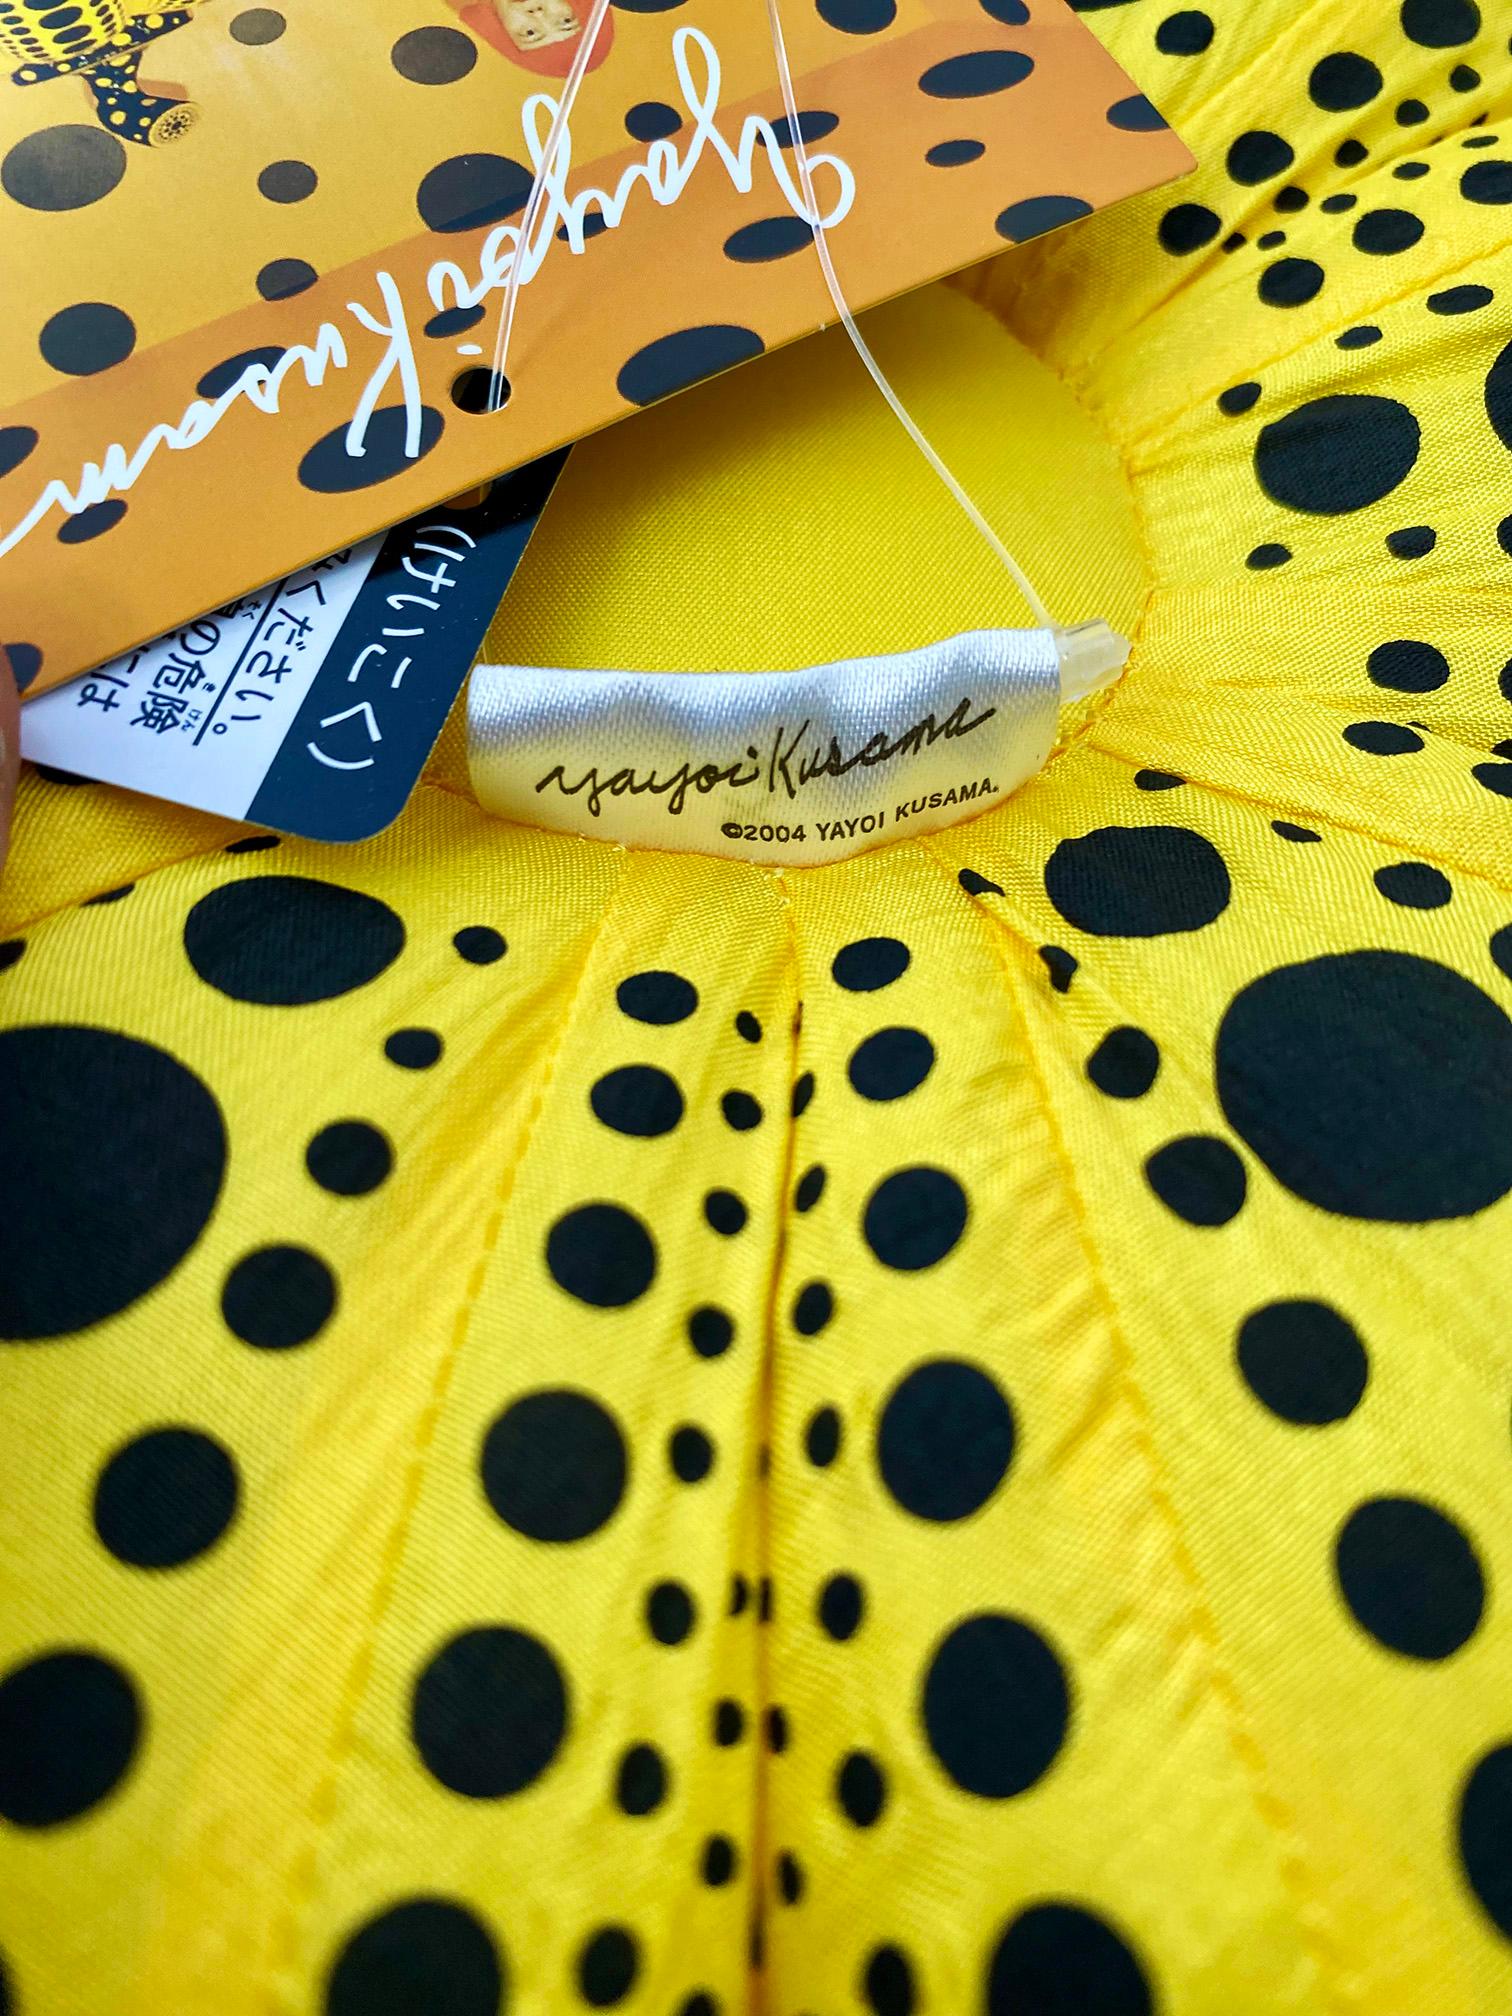 Yayoi Kusama Yellow & Black Pumpkin (plush):
An iconic, vibrantly colored pop art piece - this soft Kusama pumpkin features the universal polka dot patterns and bold colors for which the artist is perhaps best known. Kusama first used the pumpkin at